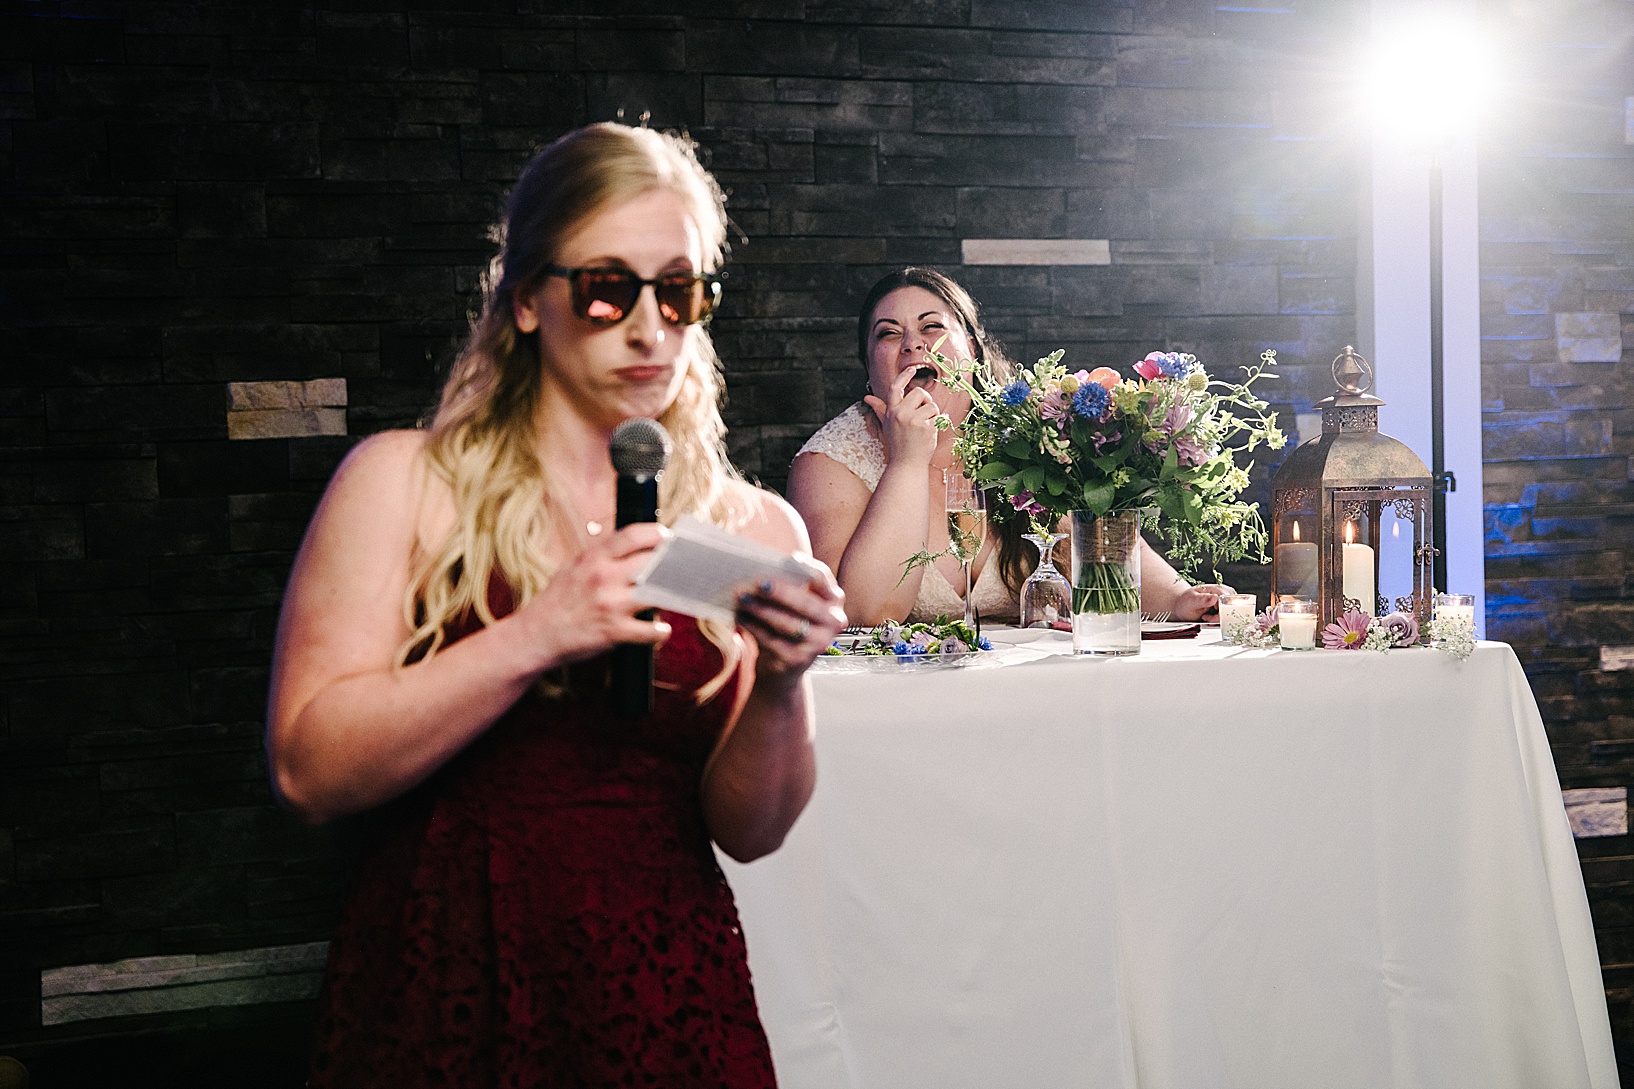 Bride laughing in background as bridesmaid gives her speech wearing sunglasses